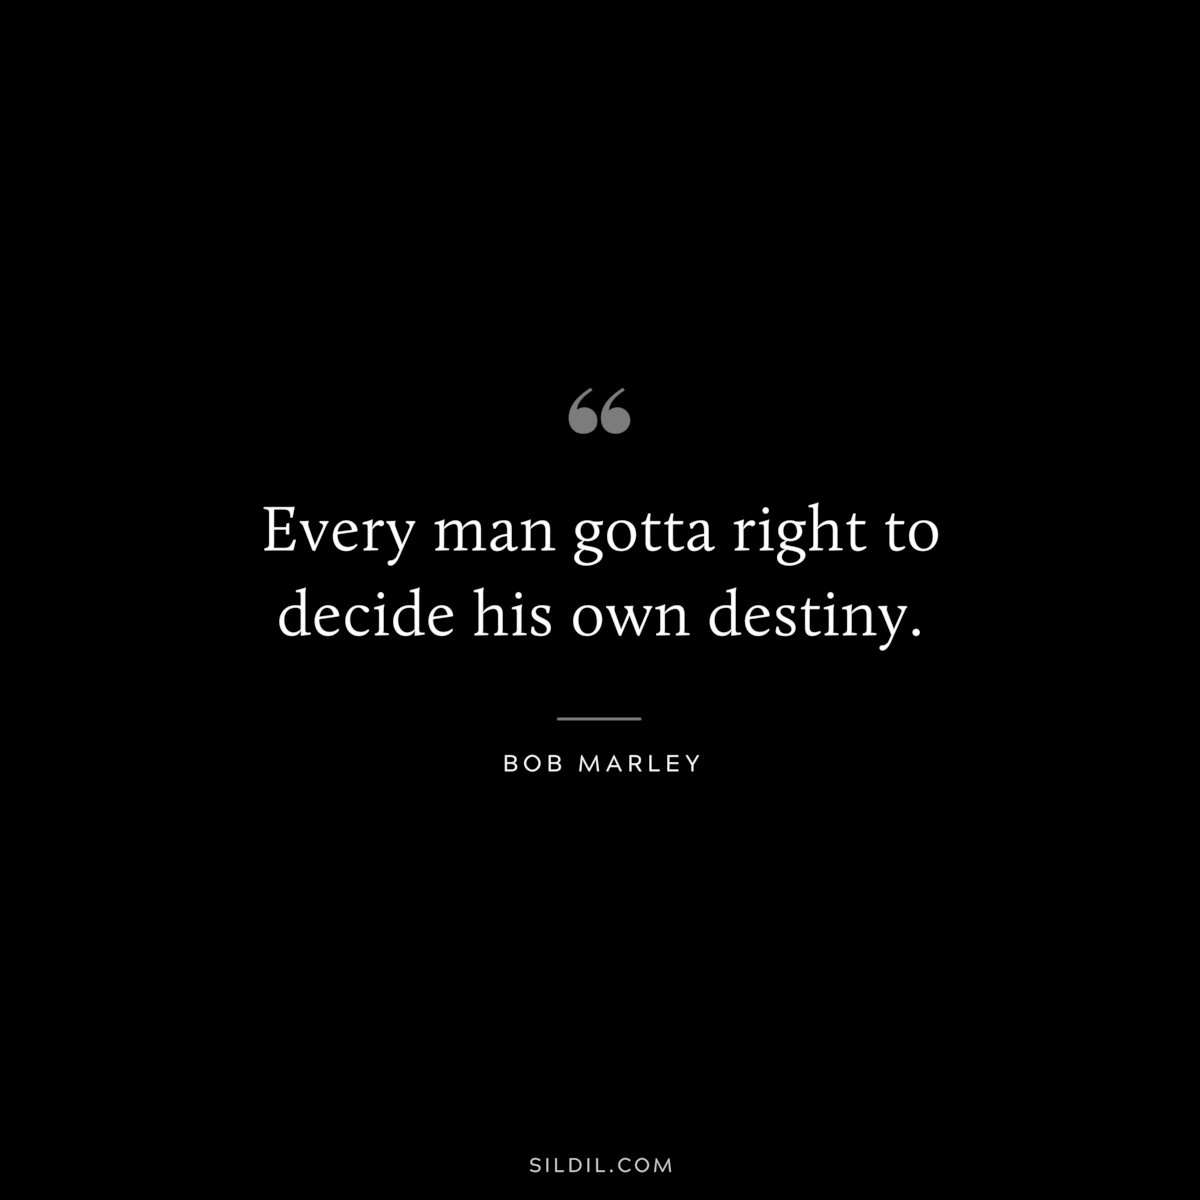 Every man gotta right to decide his own destiny. ― Bob Marley